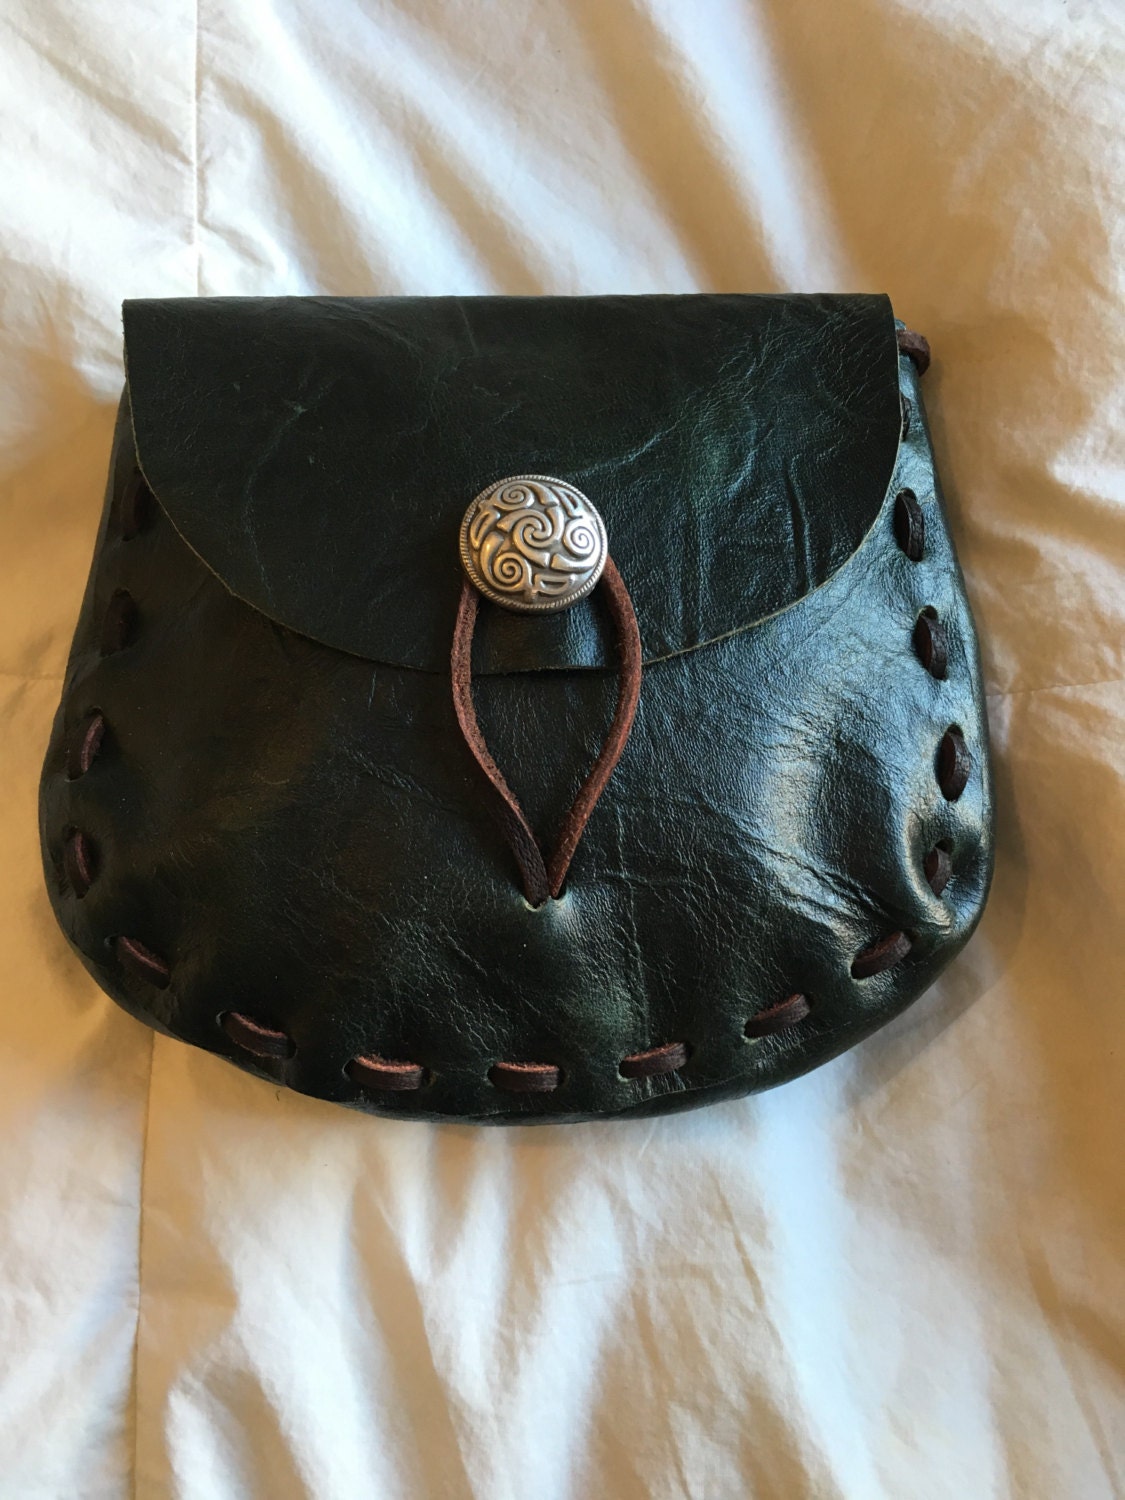 Very Dark Green Leather Medieval Style Pouch